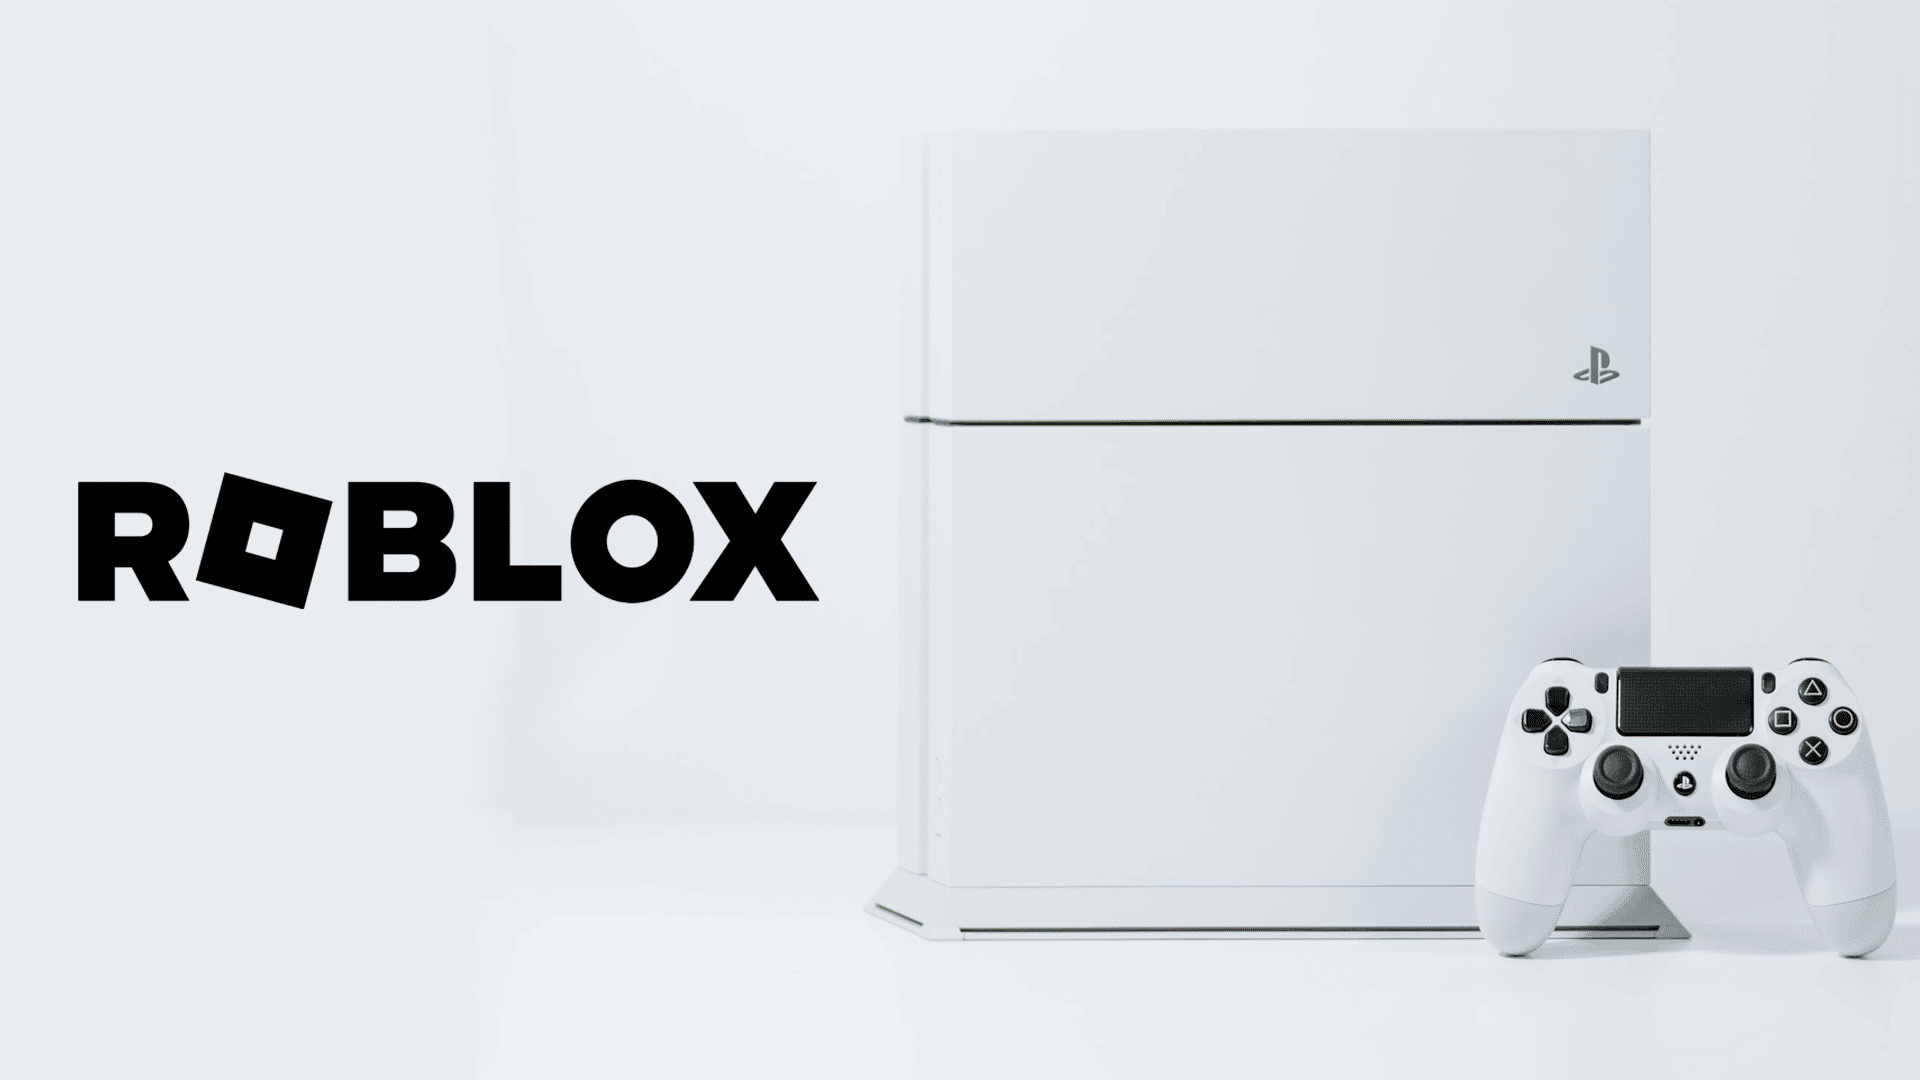 An image of Roblox's new logo and a white Playstation 4 standing side by side.